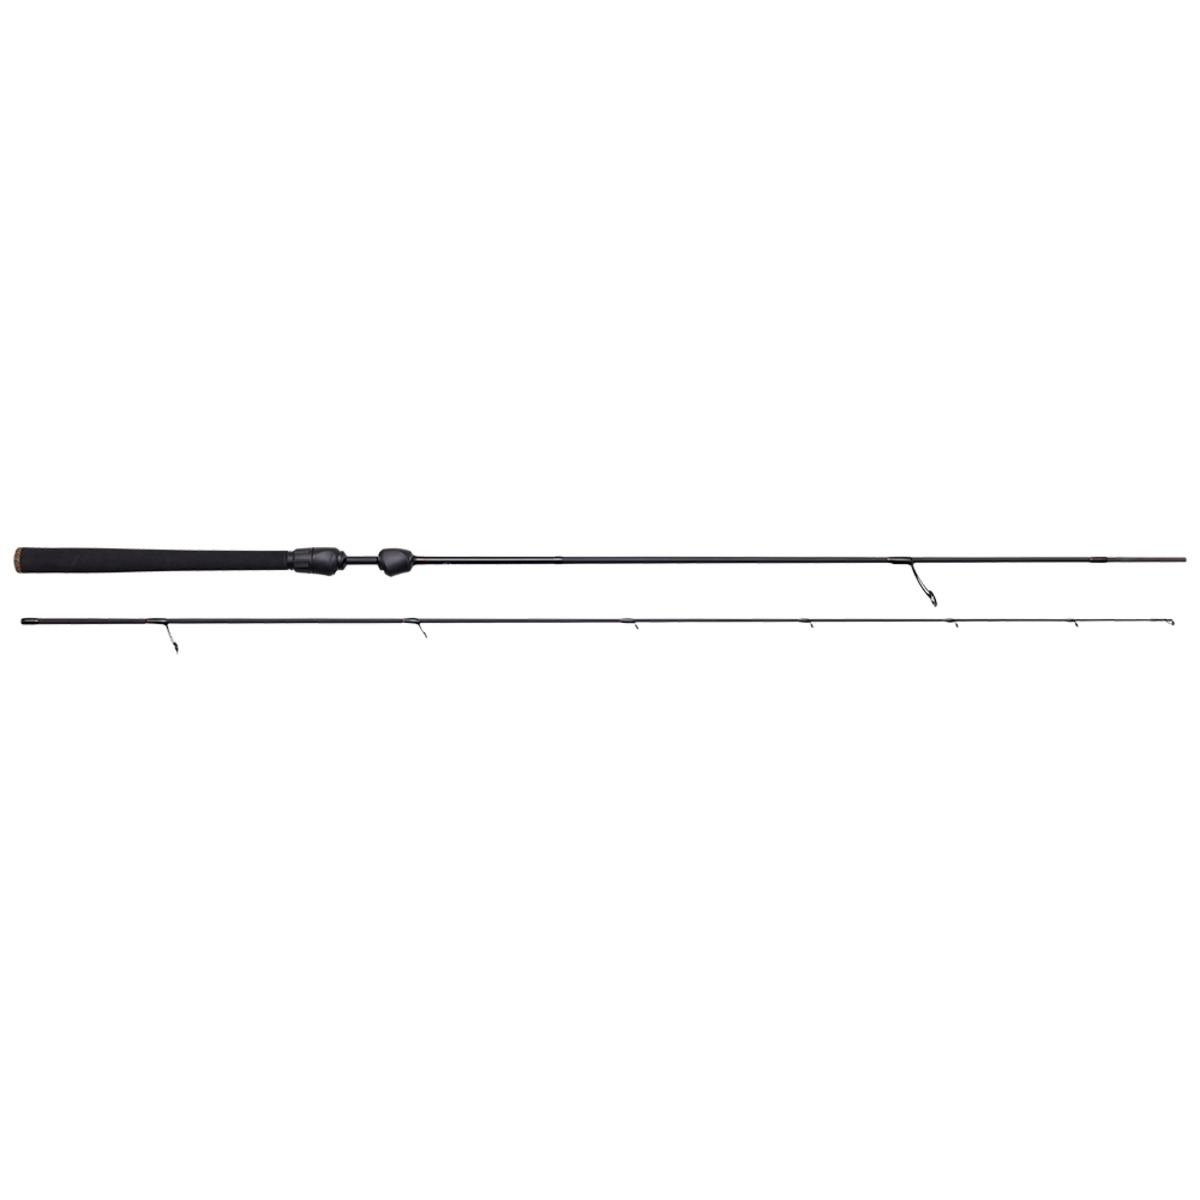 Ron Thompson Trout And Perch Stick - 7 ft 9in/242CM 5-20G 2SEC